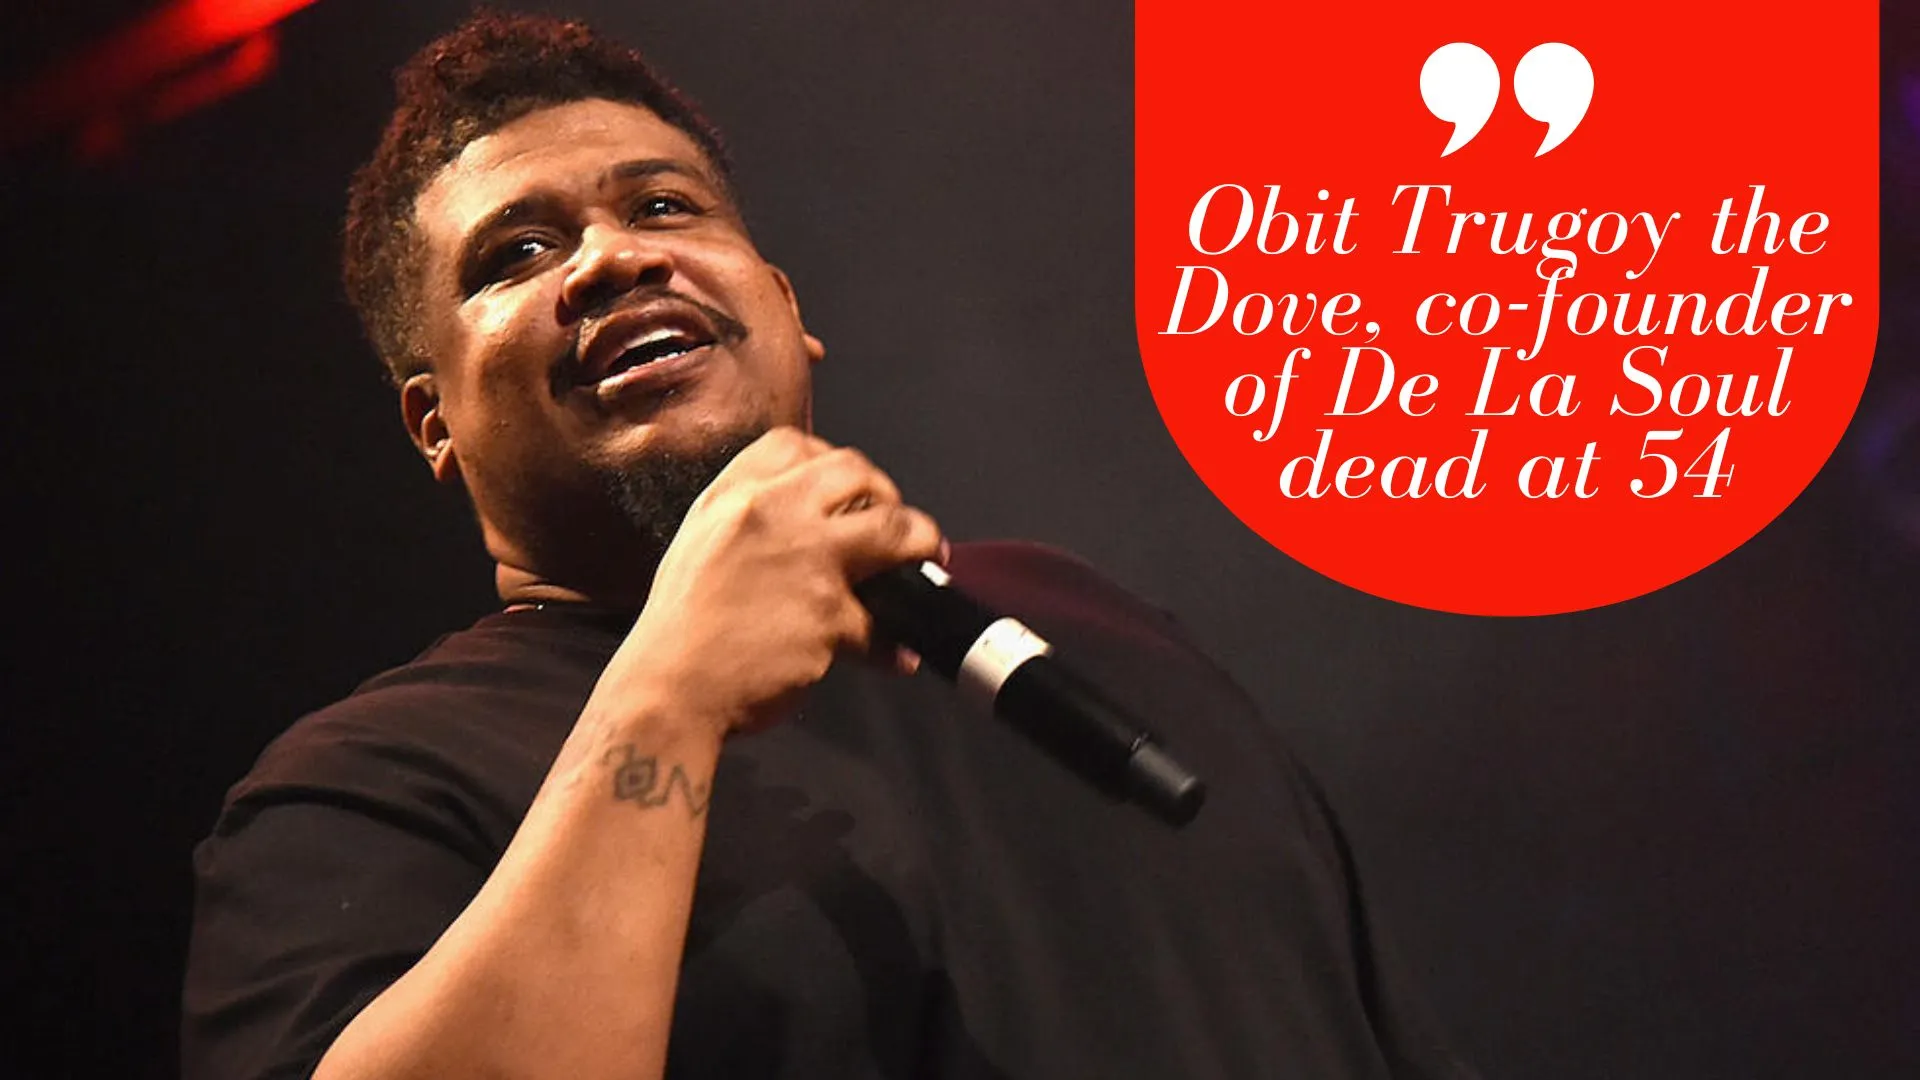 Obit Trugoy the Dove, co-founder of De La Soul dead at 54 (Image credit: theboombox)